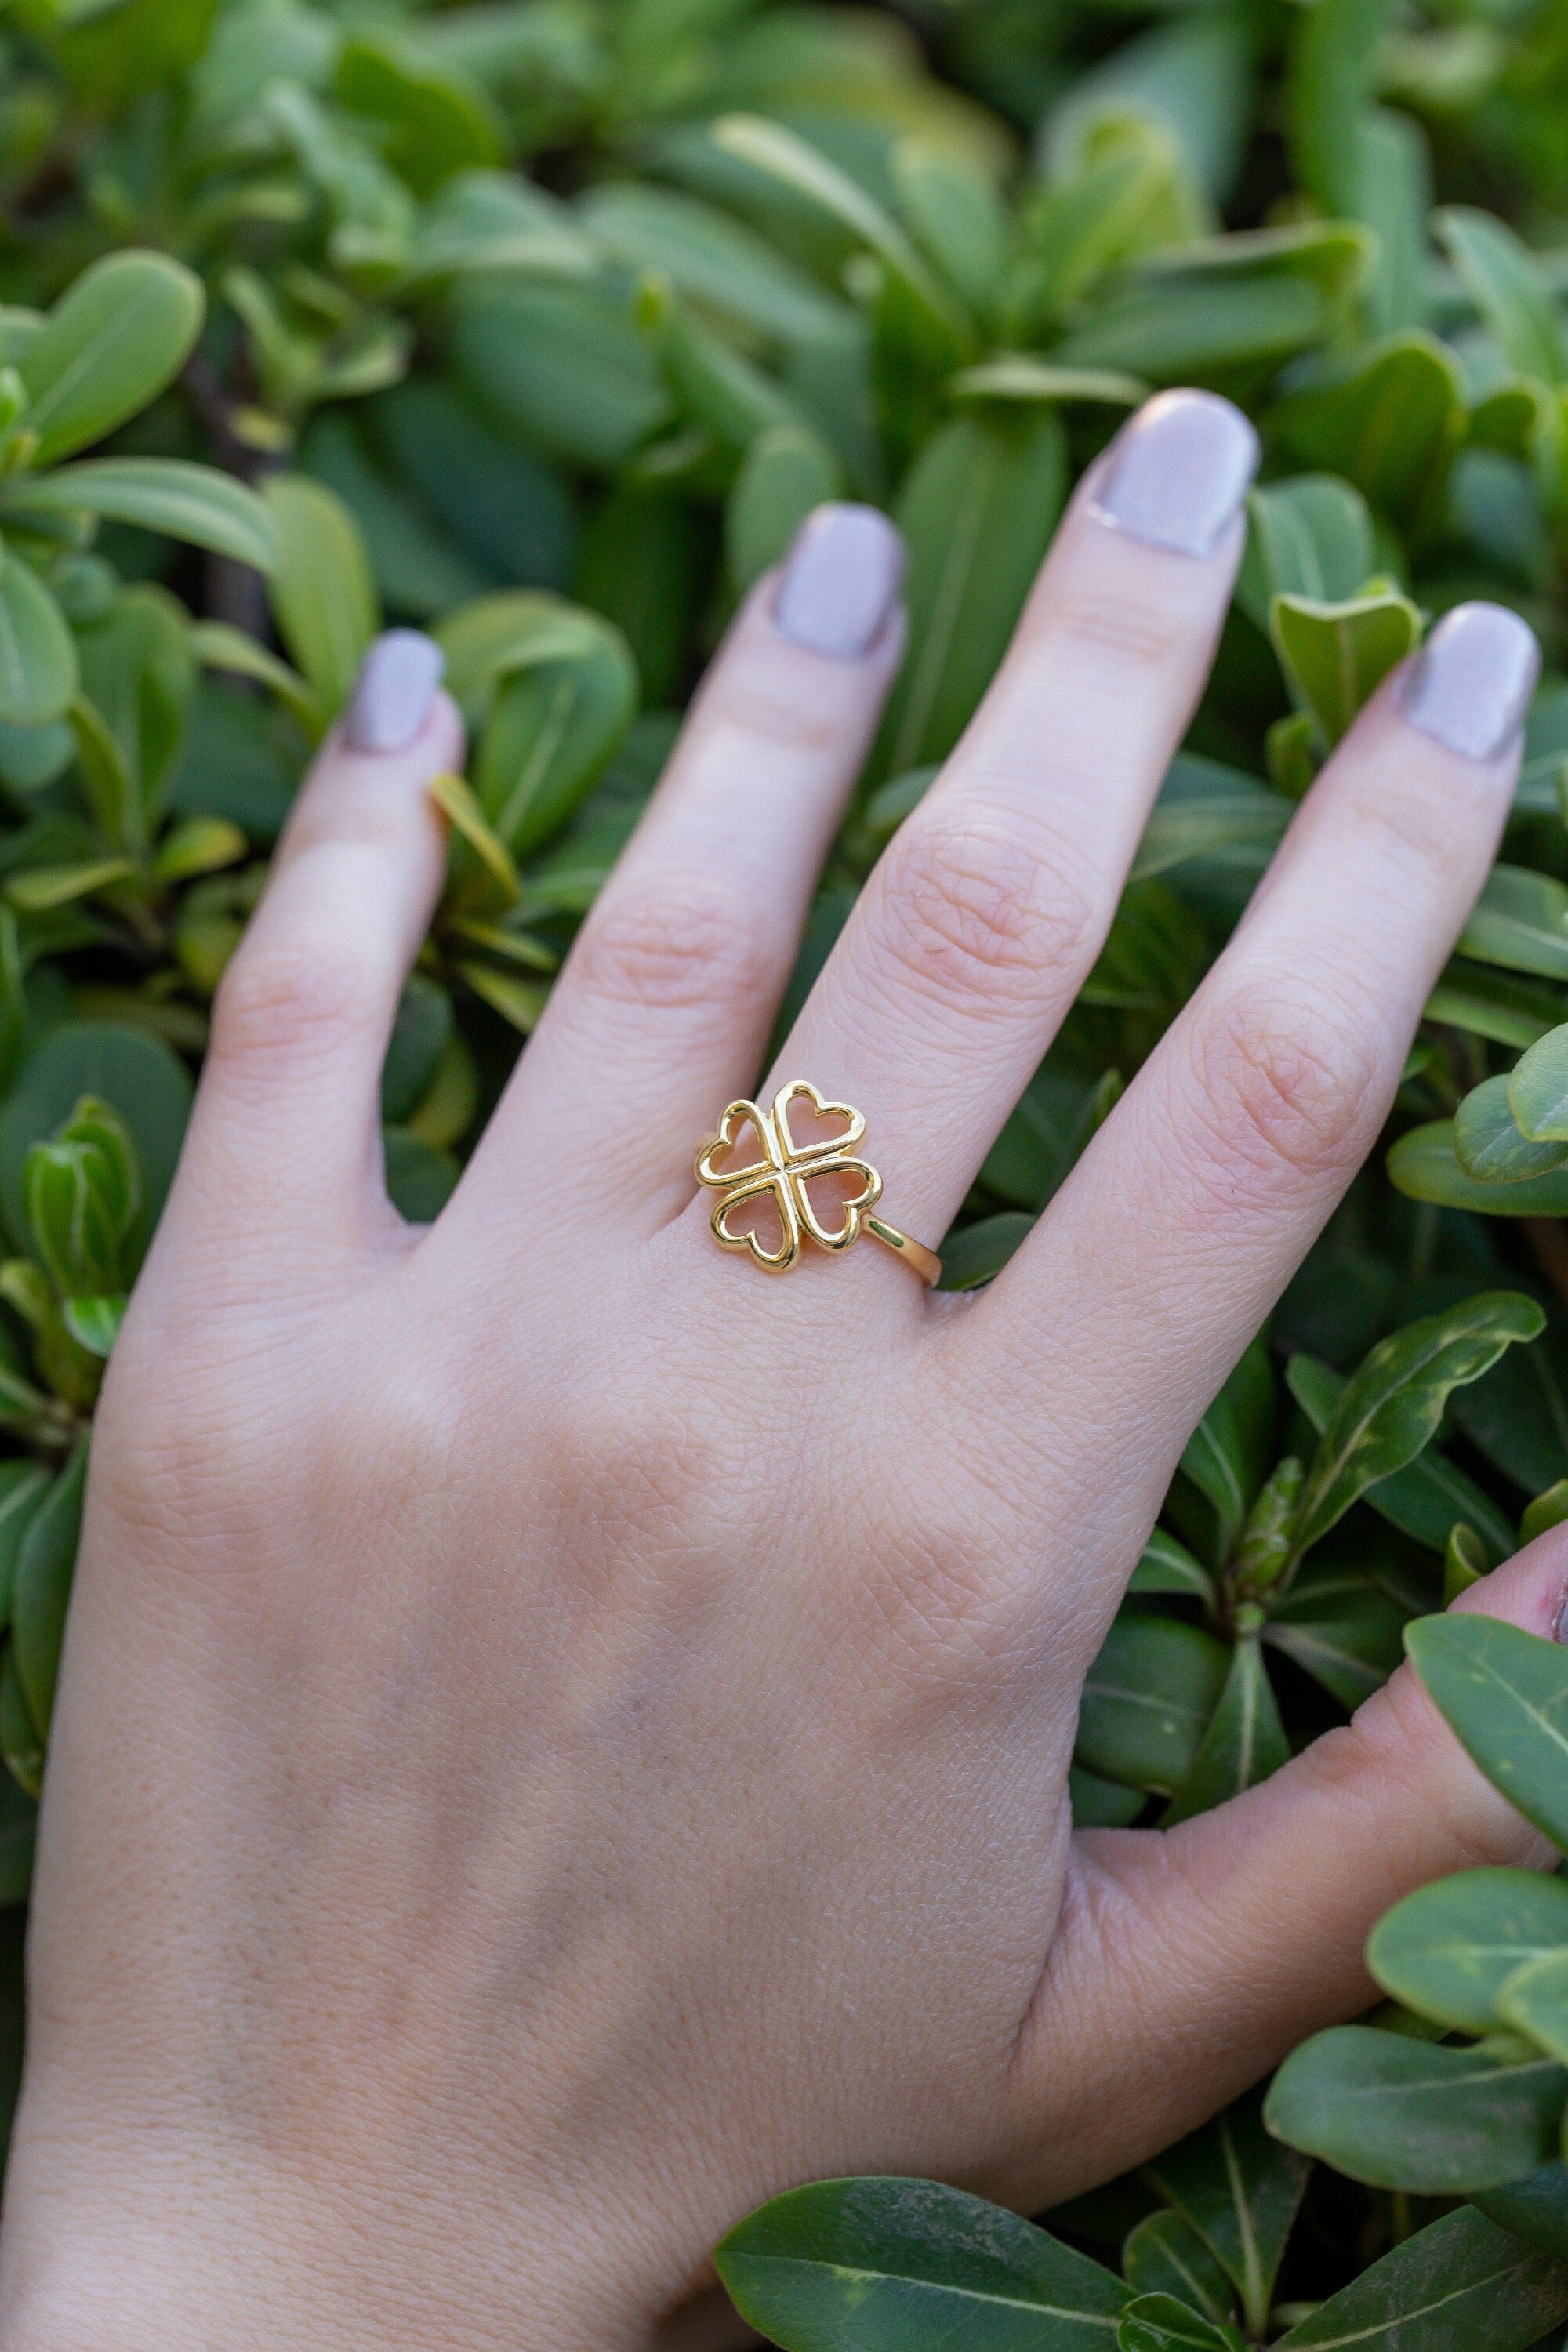 14K Gold Clover Ring, Unique Four Leaf Charm Ring, Artisan-Made Lucky Symbol Jewelry, Clover Leaf Ring, 925 Silver Ring for Good Fortune